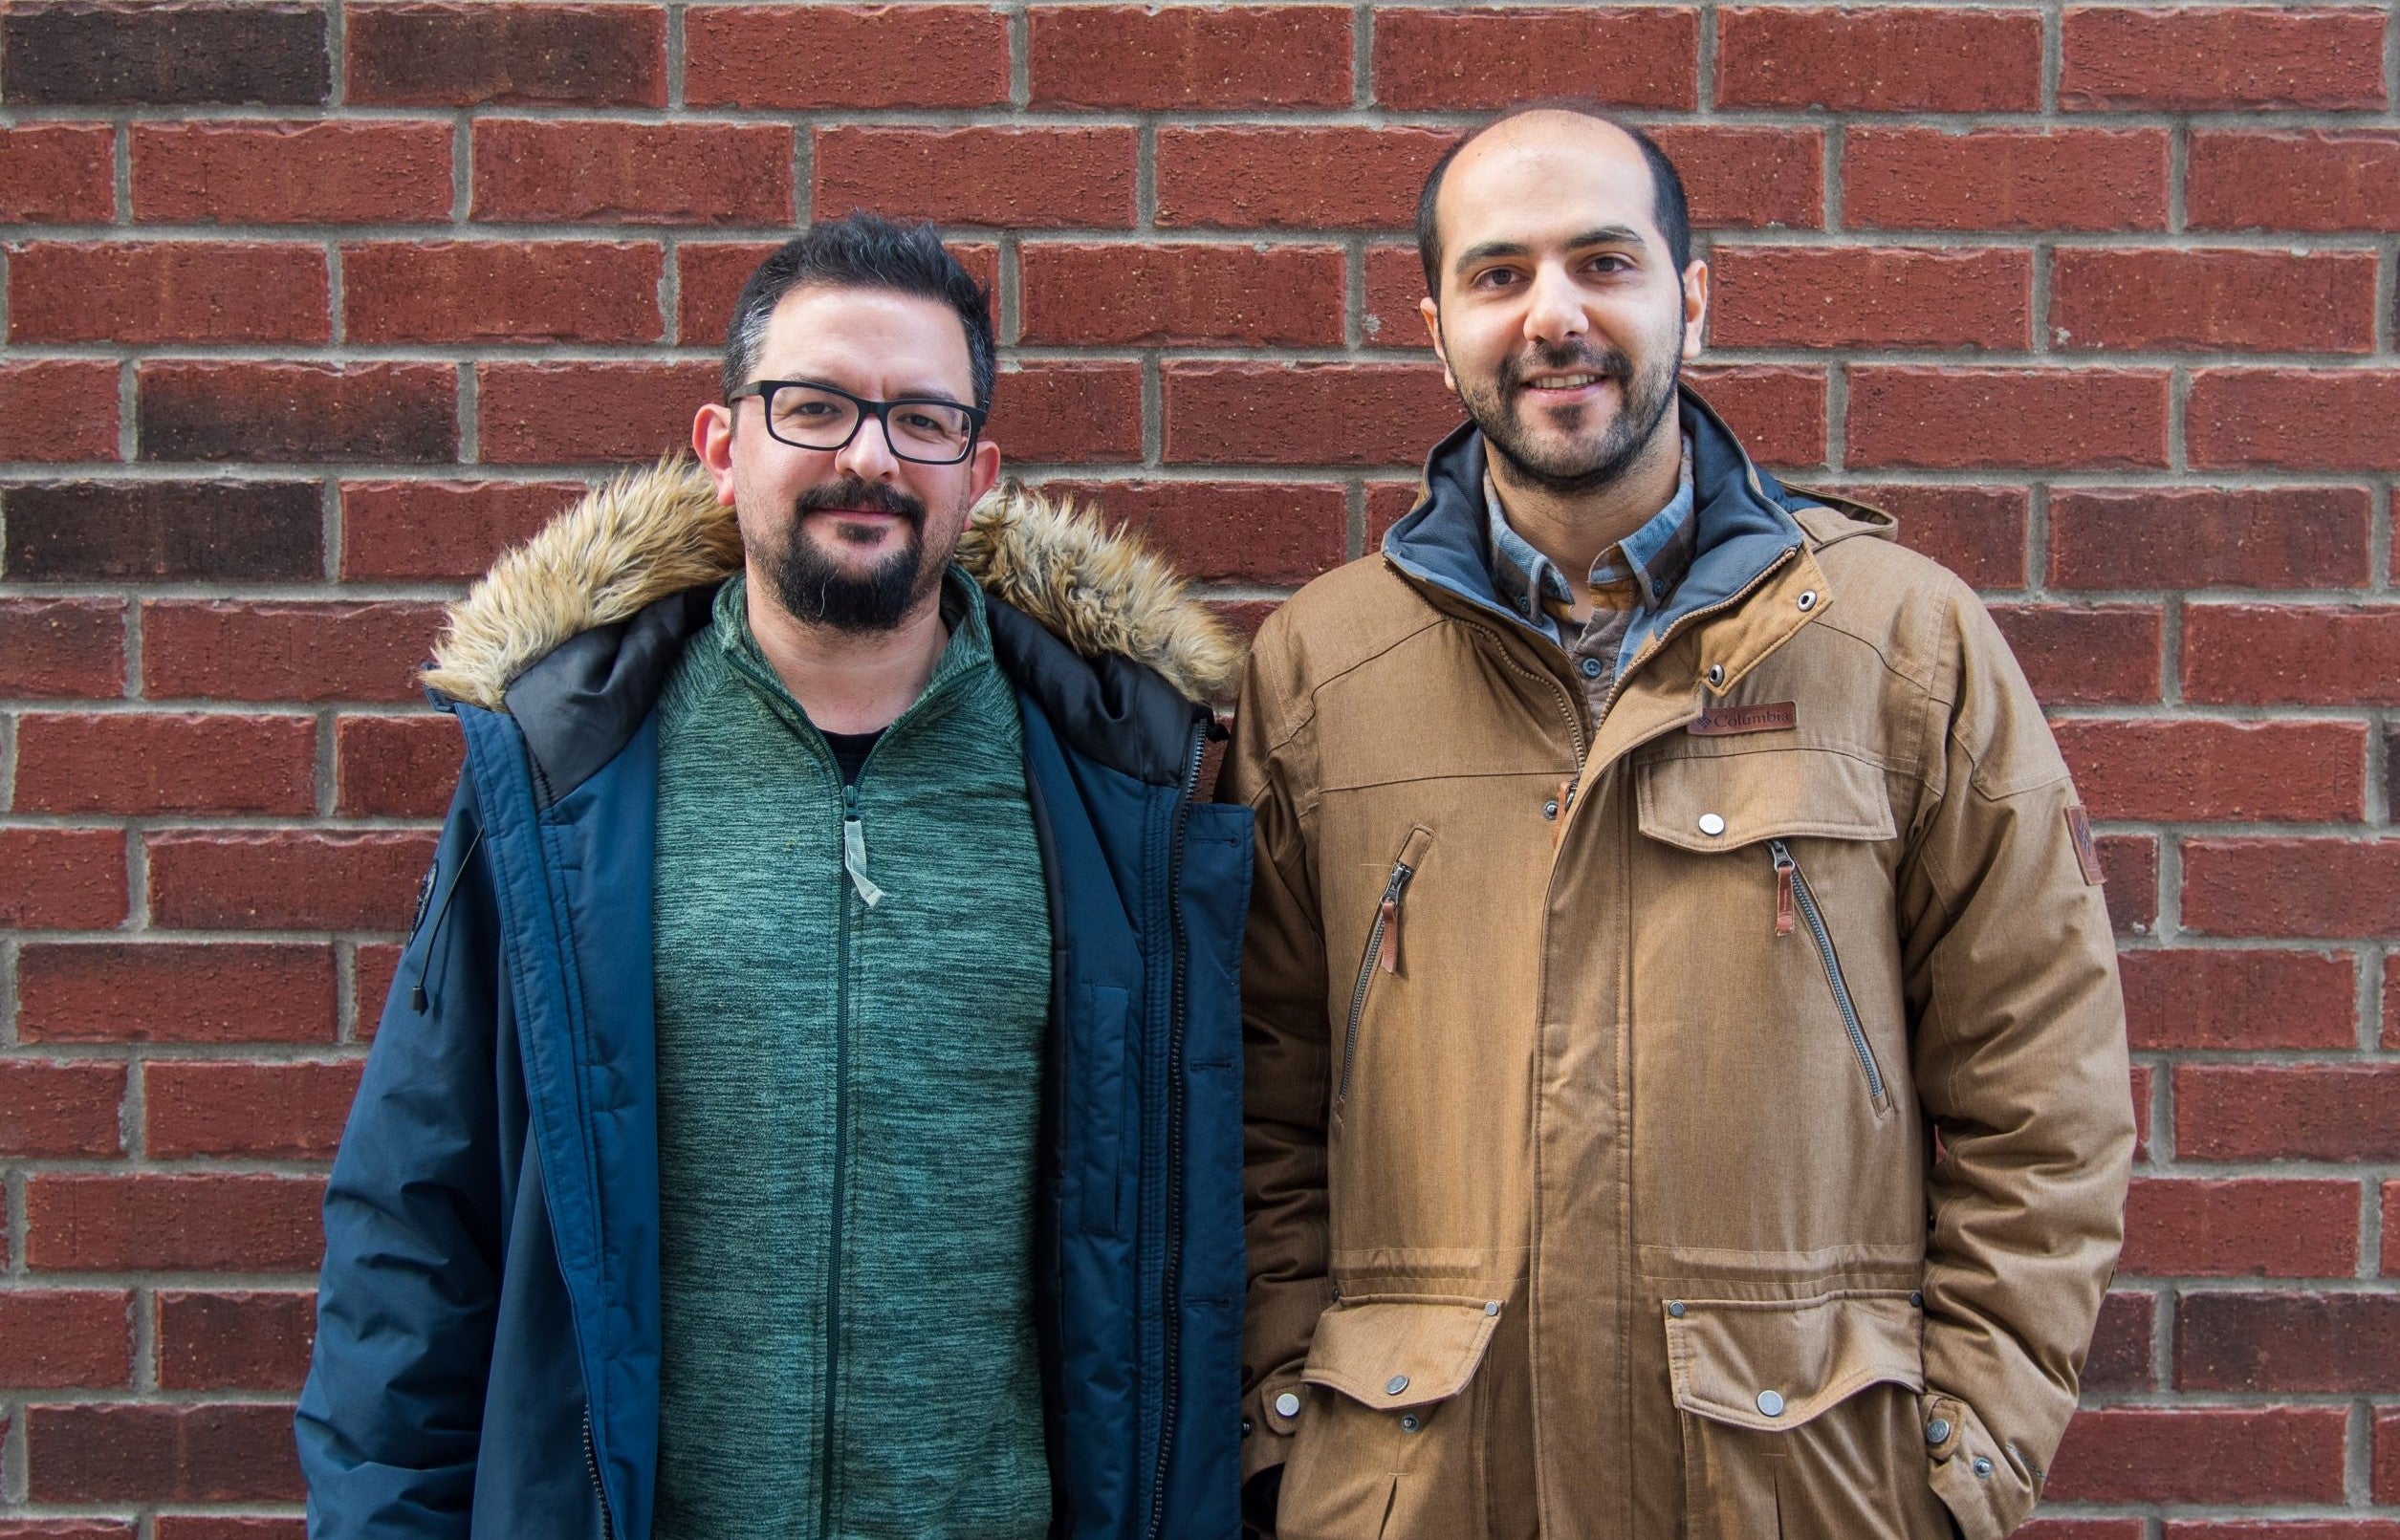 Dr. Milad Nazarahari (right) worked during his fellowship at Waterloo Engineering under the supervision of Dr. Arash Arami.